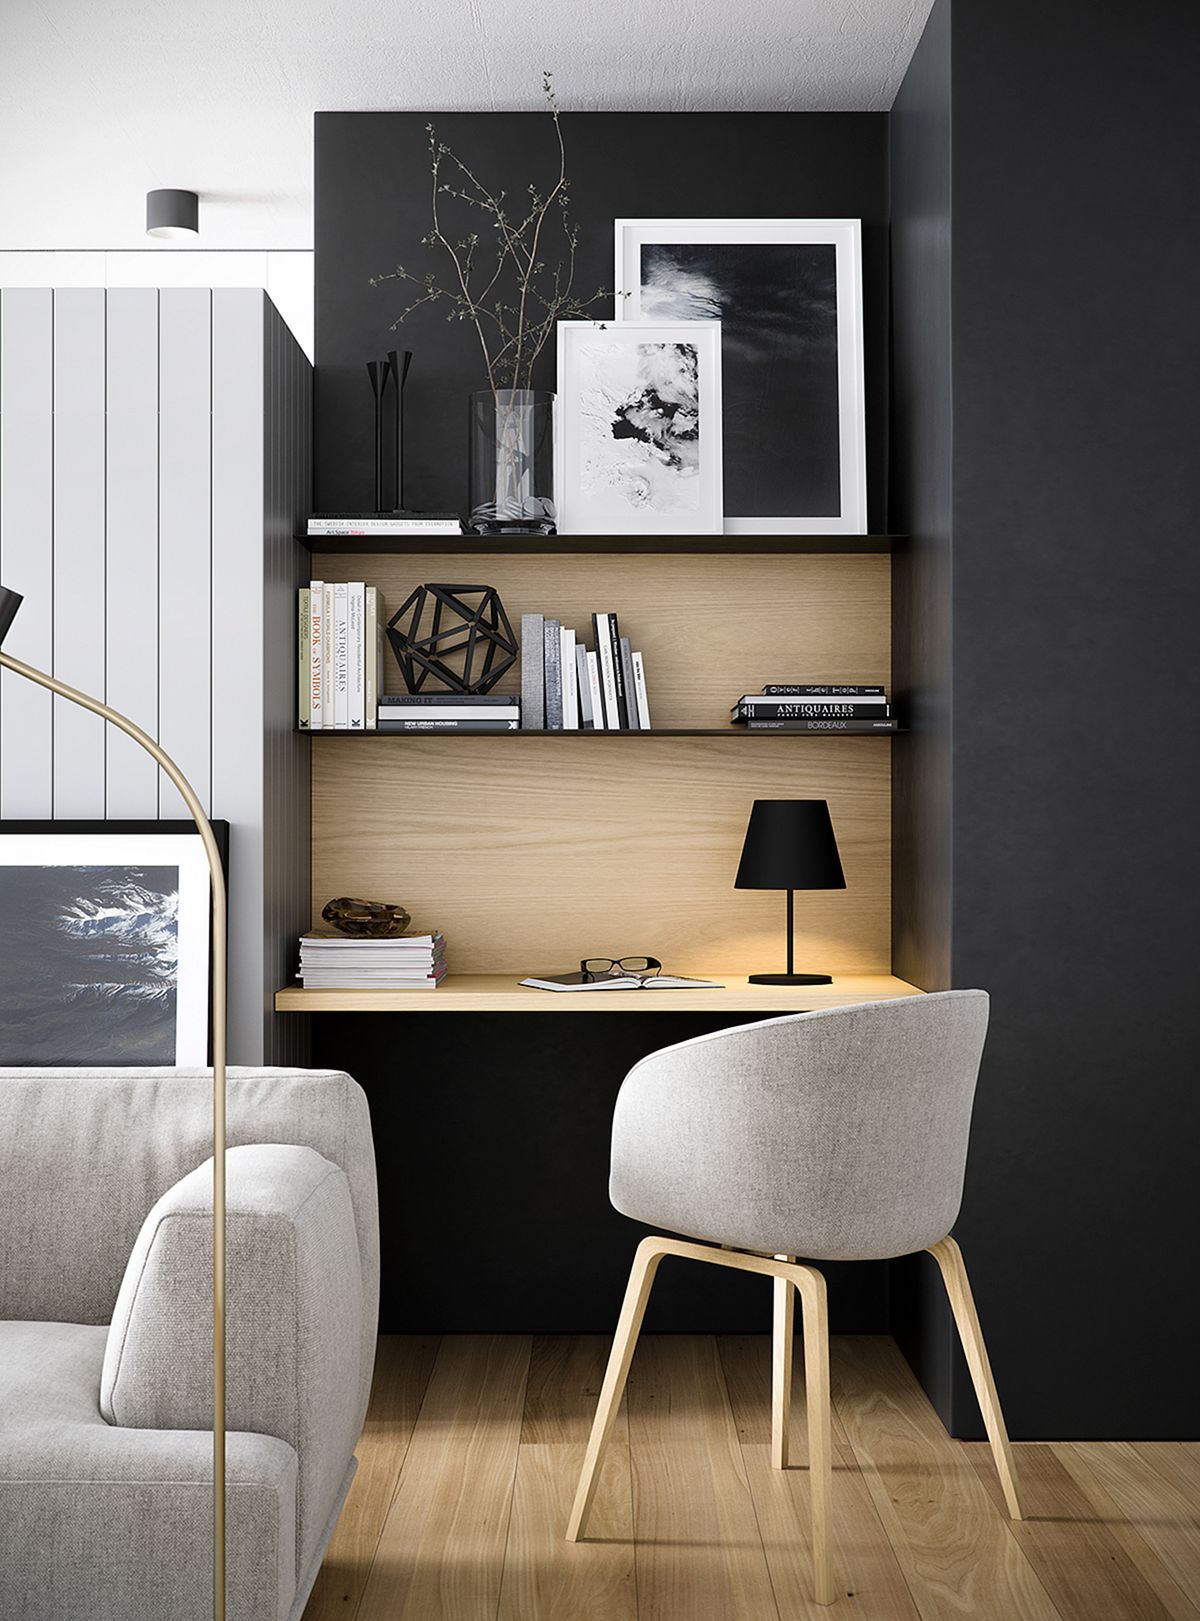  Ideas For A Study with Simple Decor